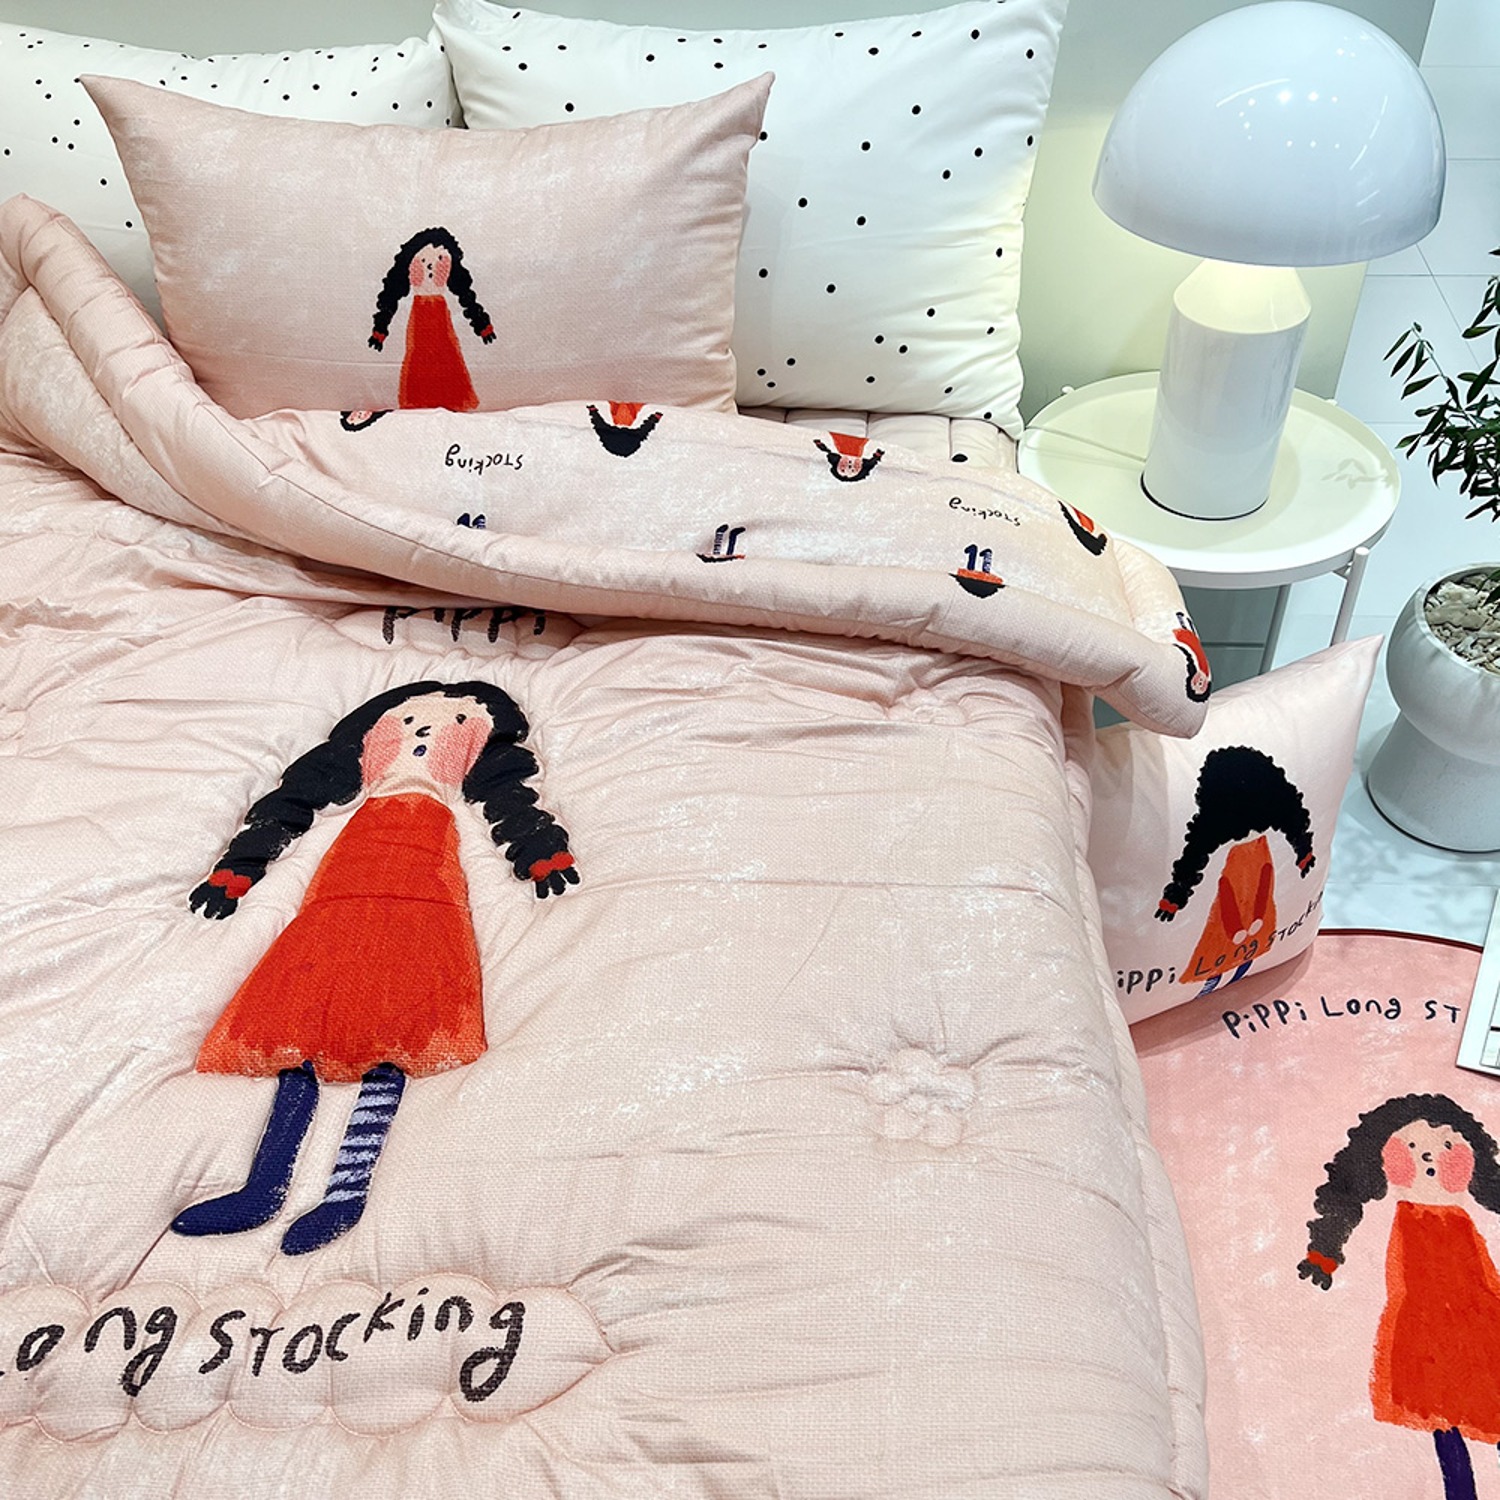 [drawing AMY] Pippi Long Stocking bed comforter set